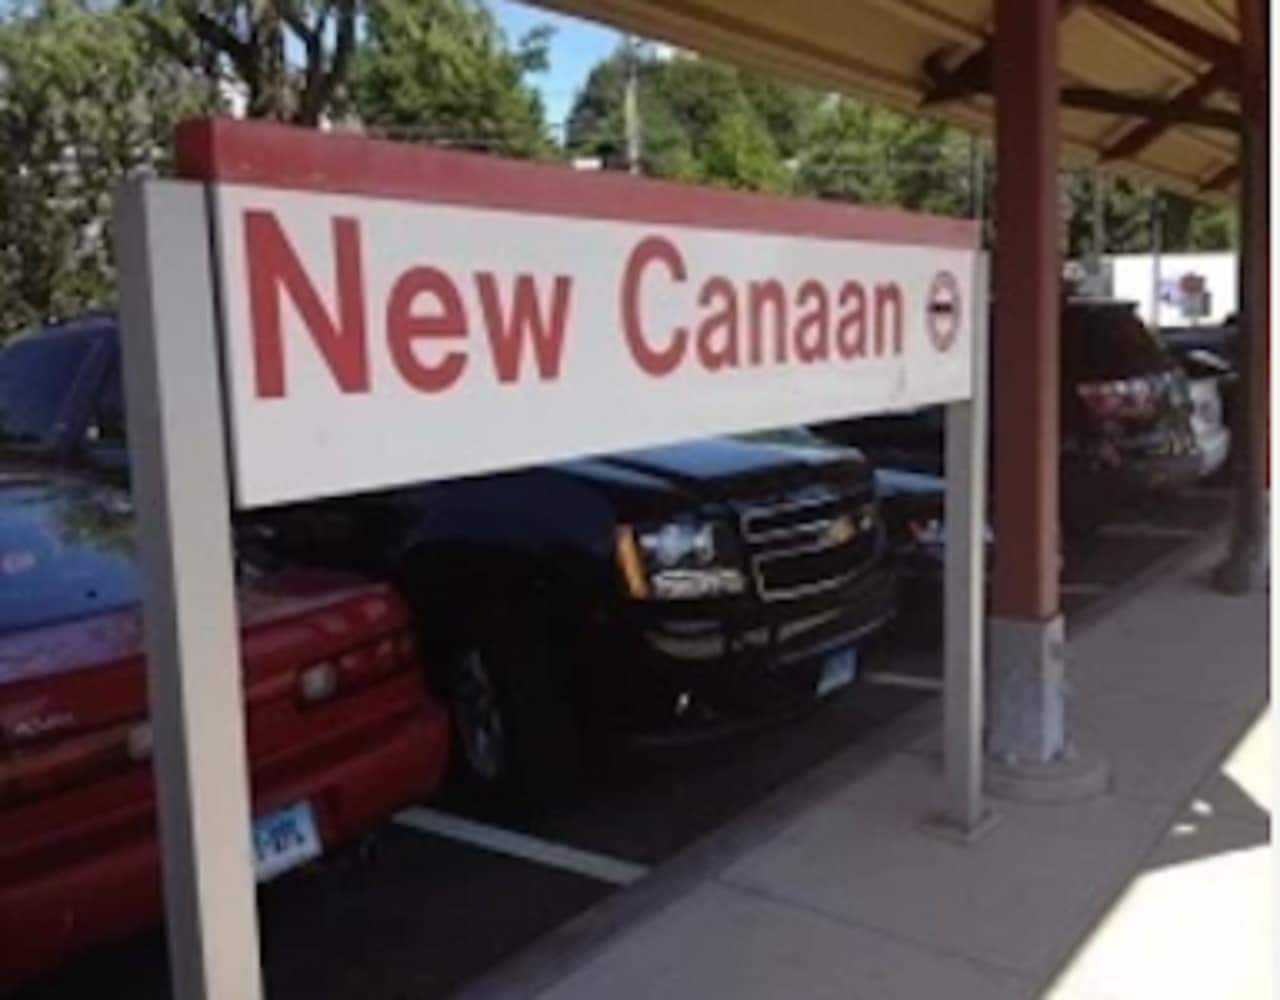 Buses will begin running today for the weekend to take Metro-North passengers of select trains on the New Canaan line to the Stamford Metro-North station to allow for track work. The buses will roll again two weekends in April and one in May.